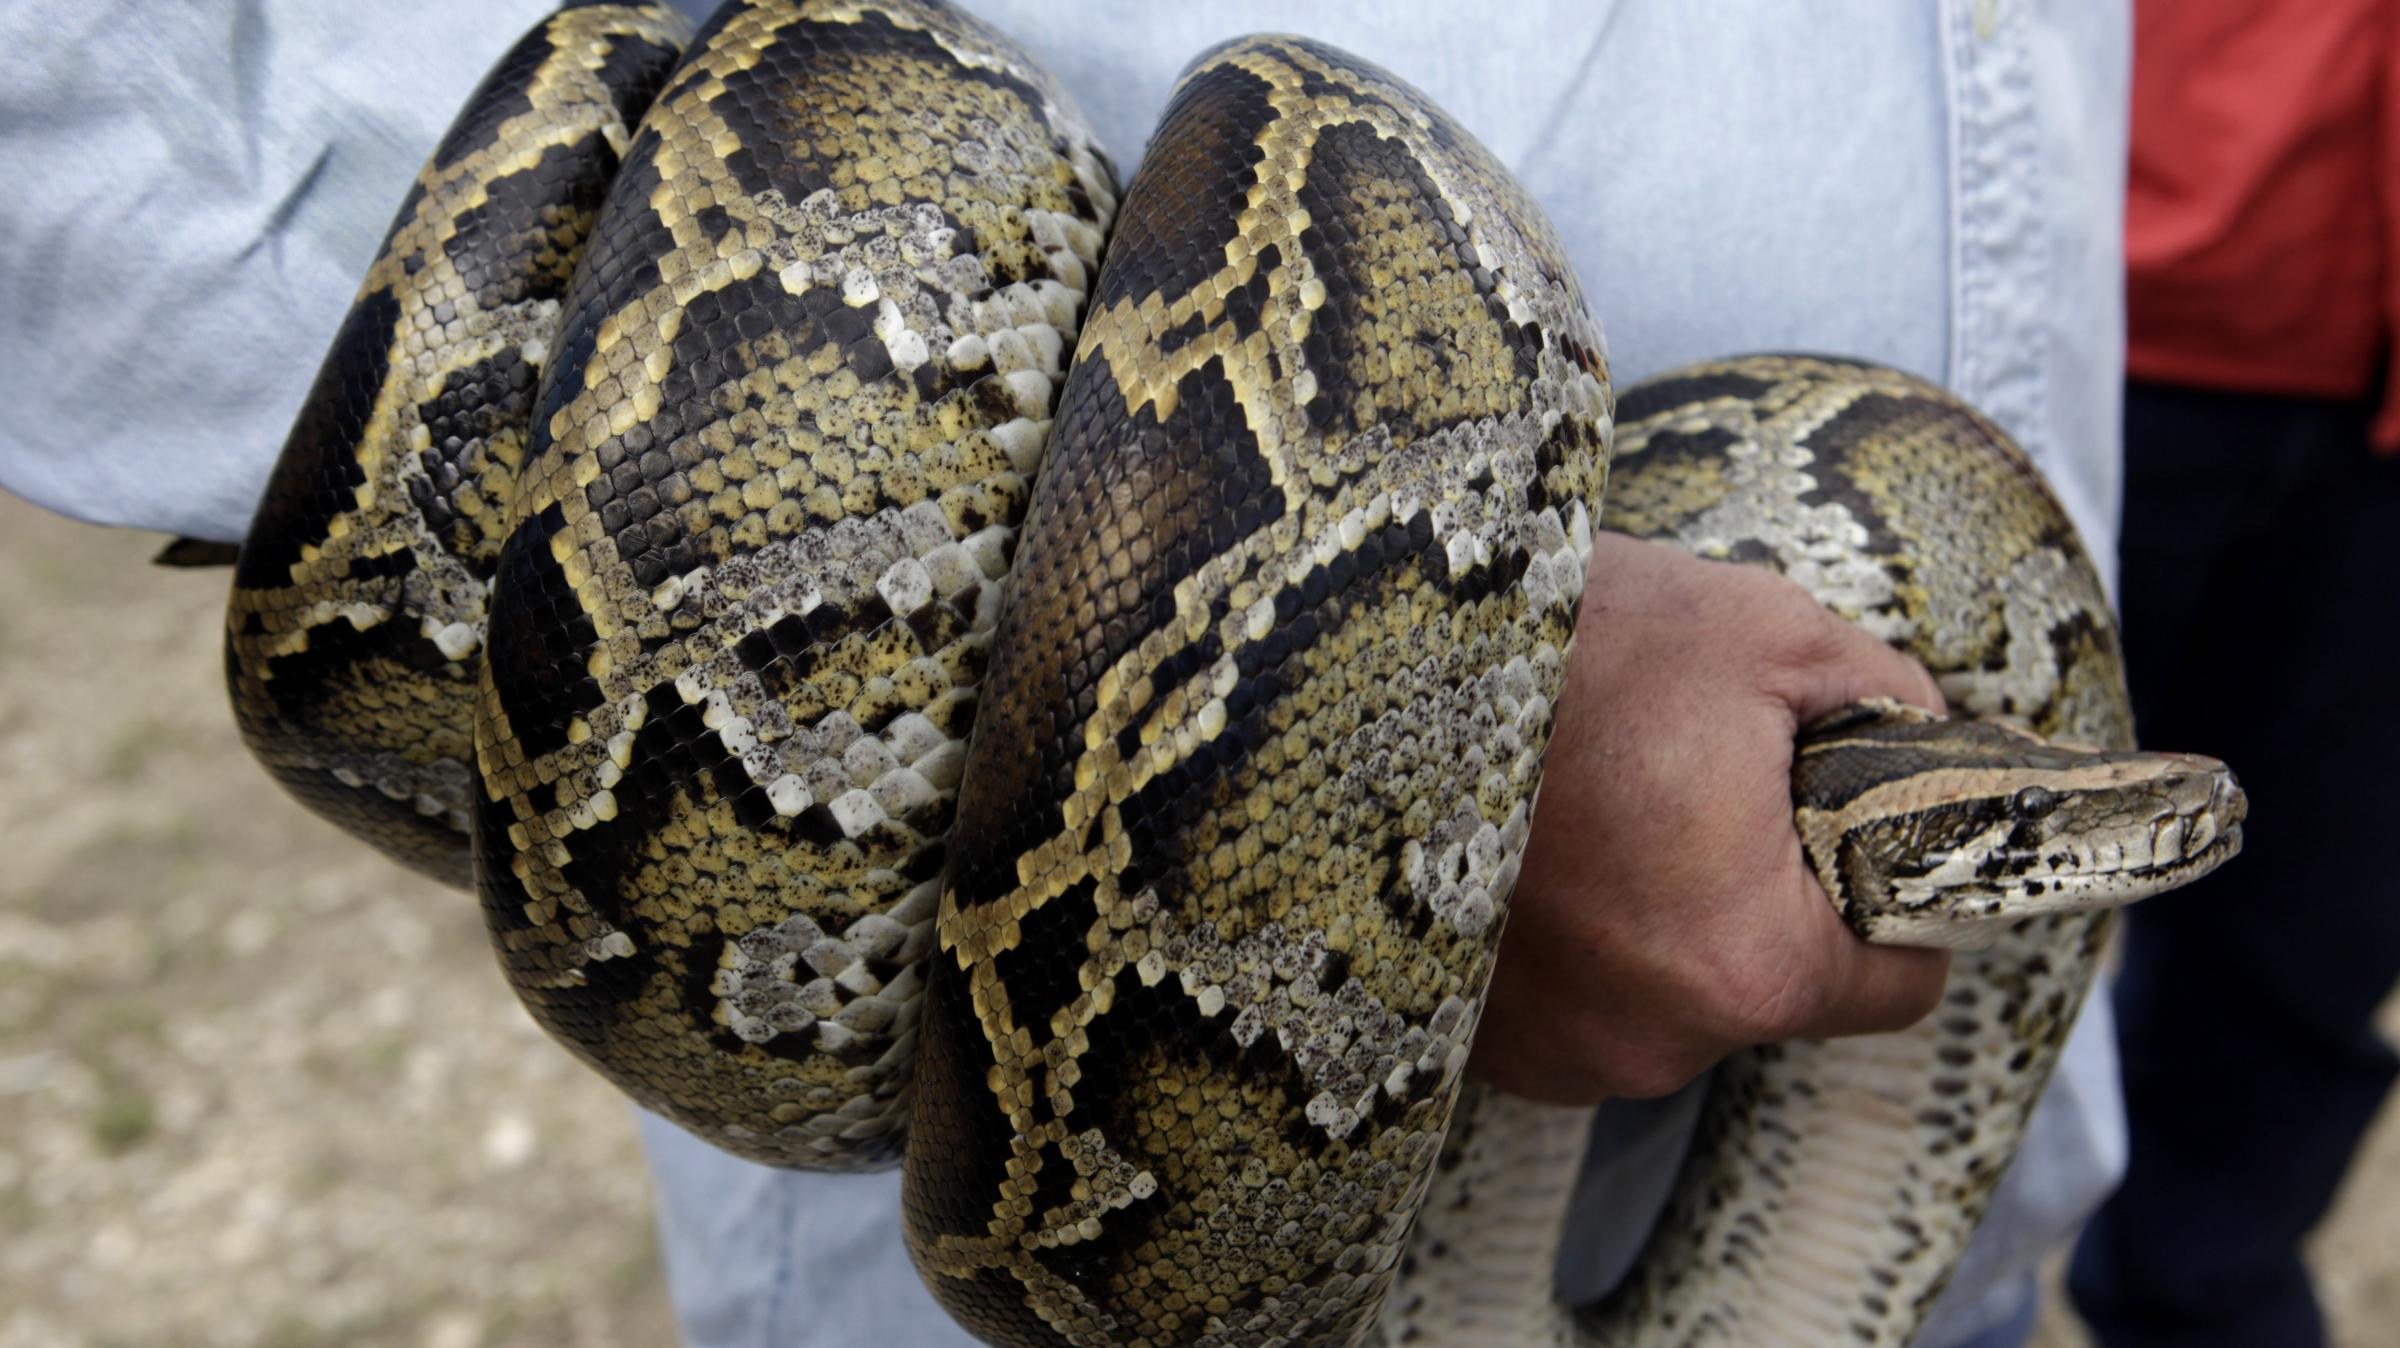 Will Florida Pythons Slither To Rest Of The U.S.? | WBFO